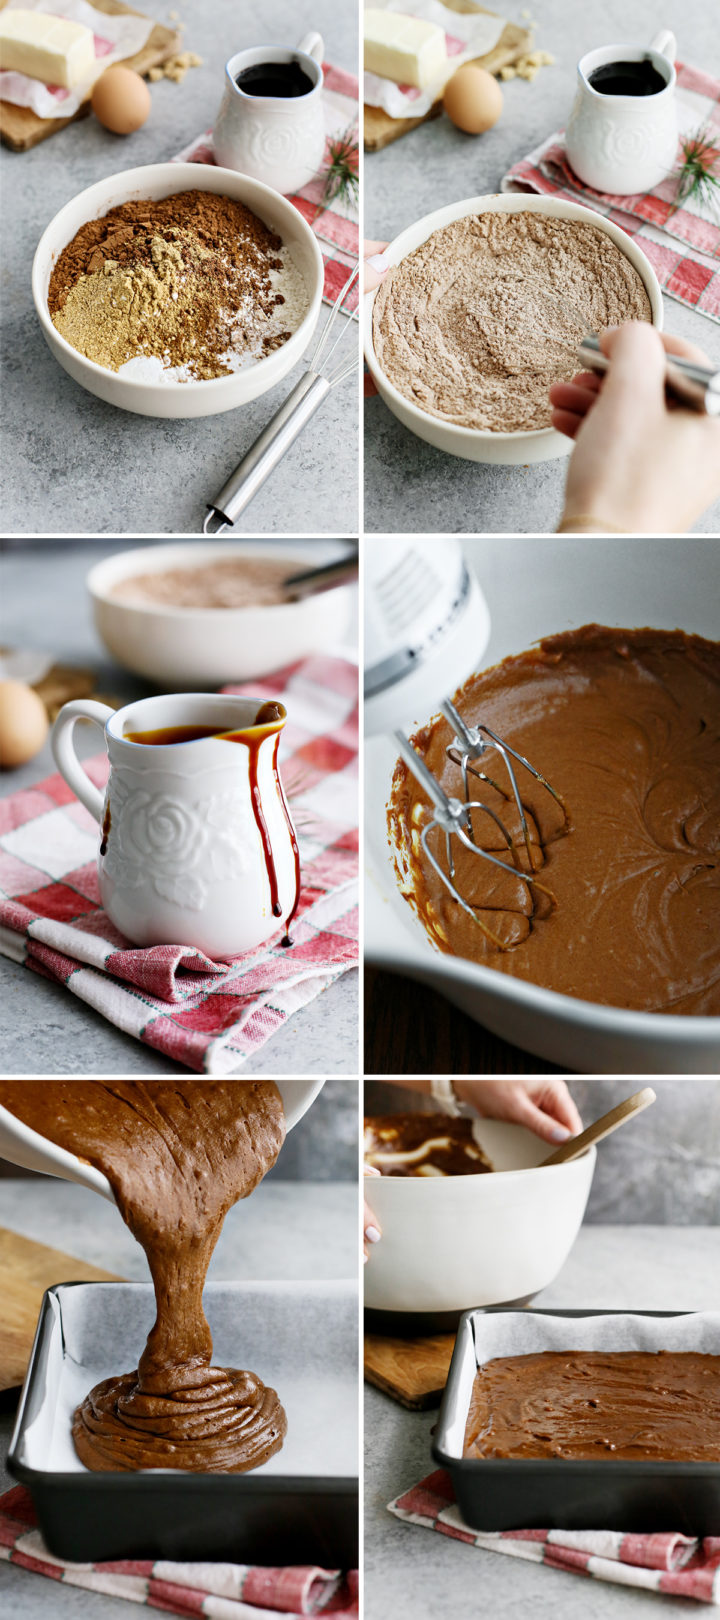 step by step photos showing how to make this recipe for gingerbread cake